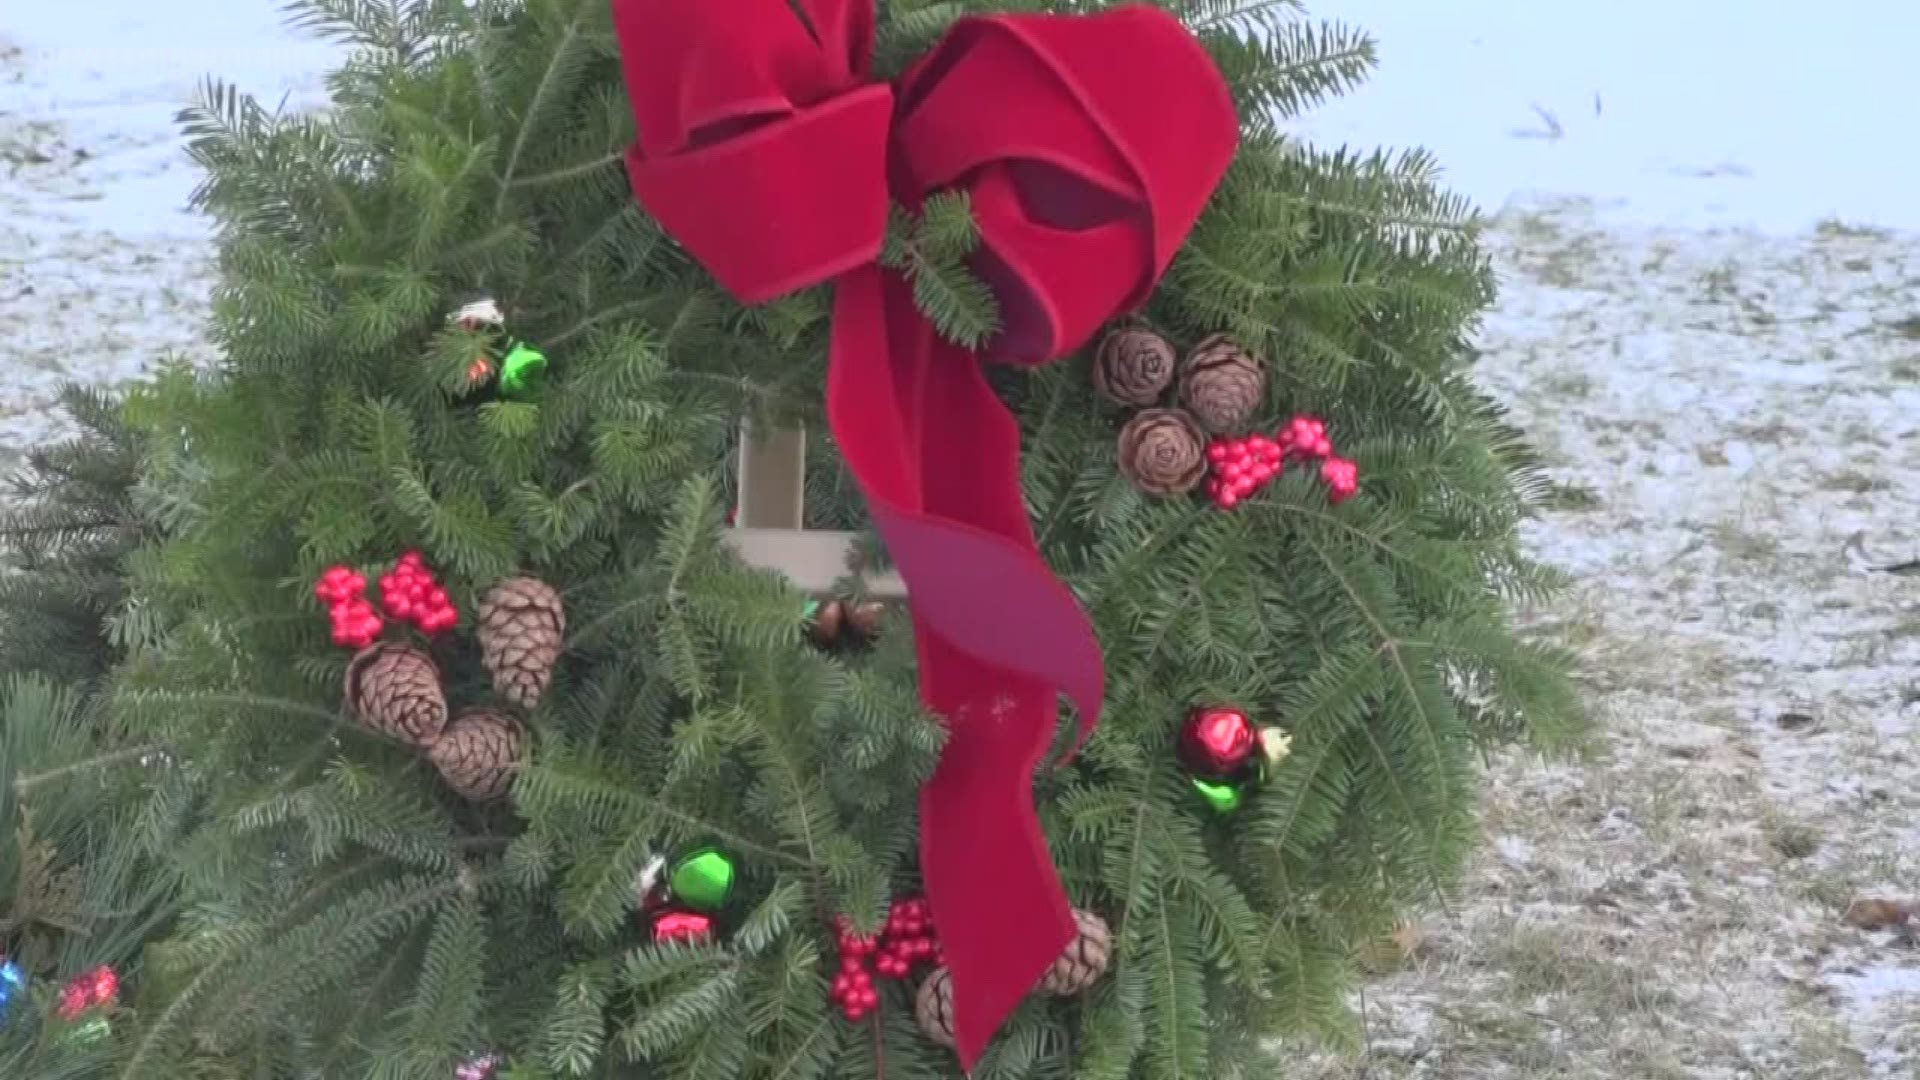 Young boy raises money for wreaths